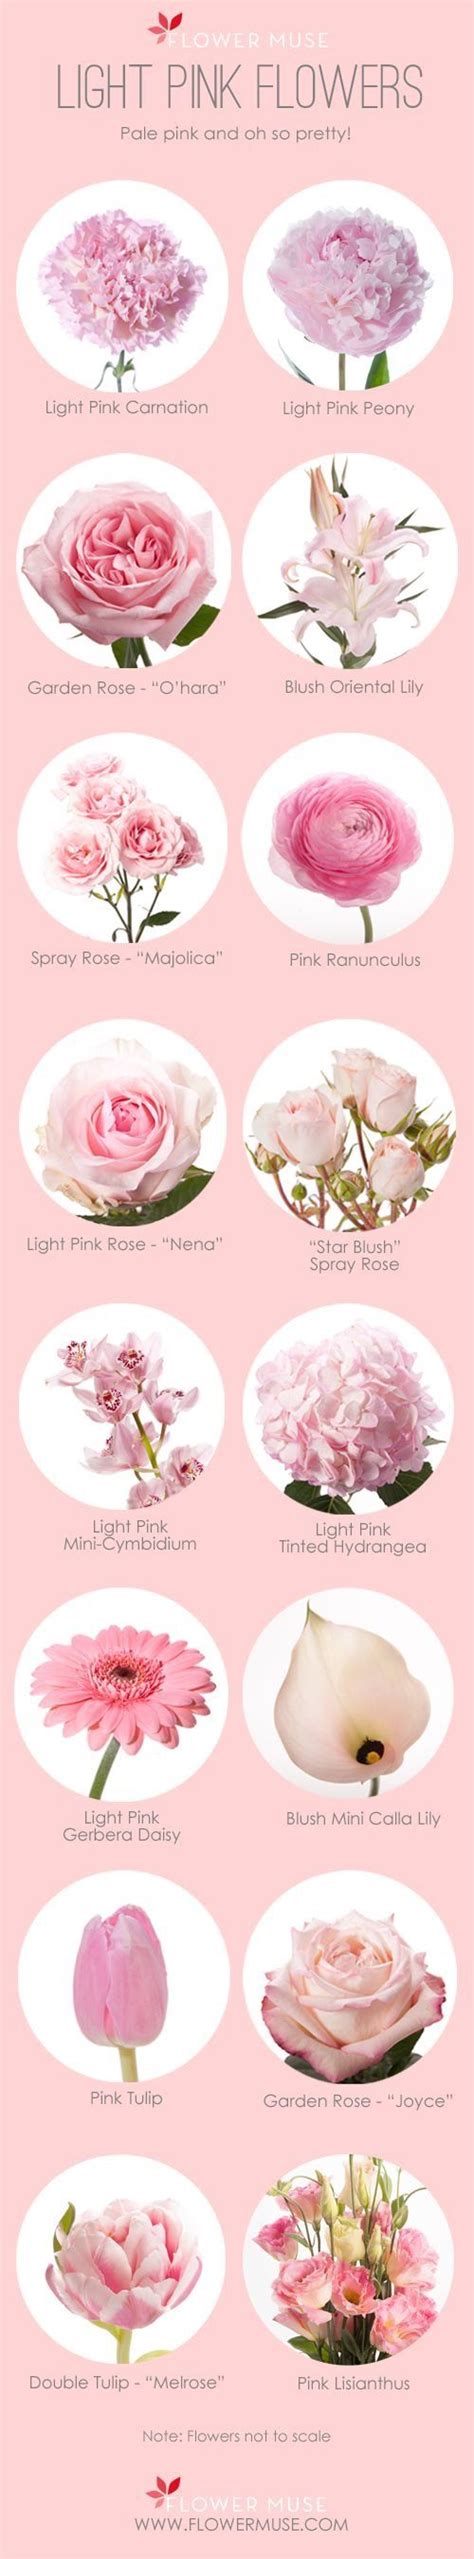 Pin By Purrfect On Flowers Light Pink Flowers Types Of Flowers